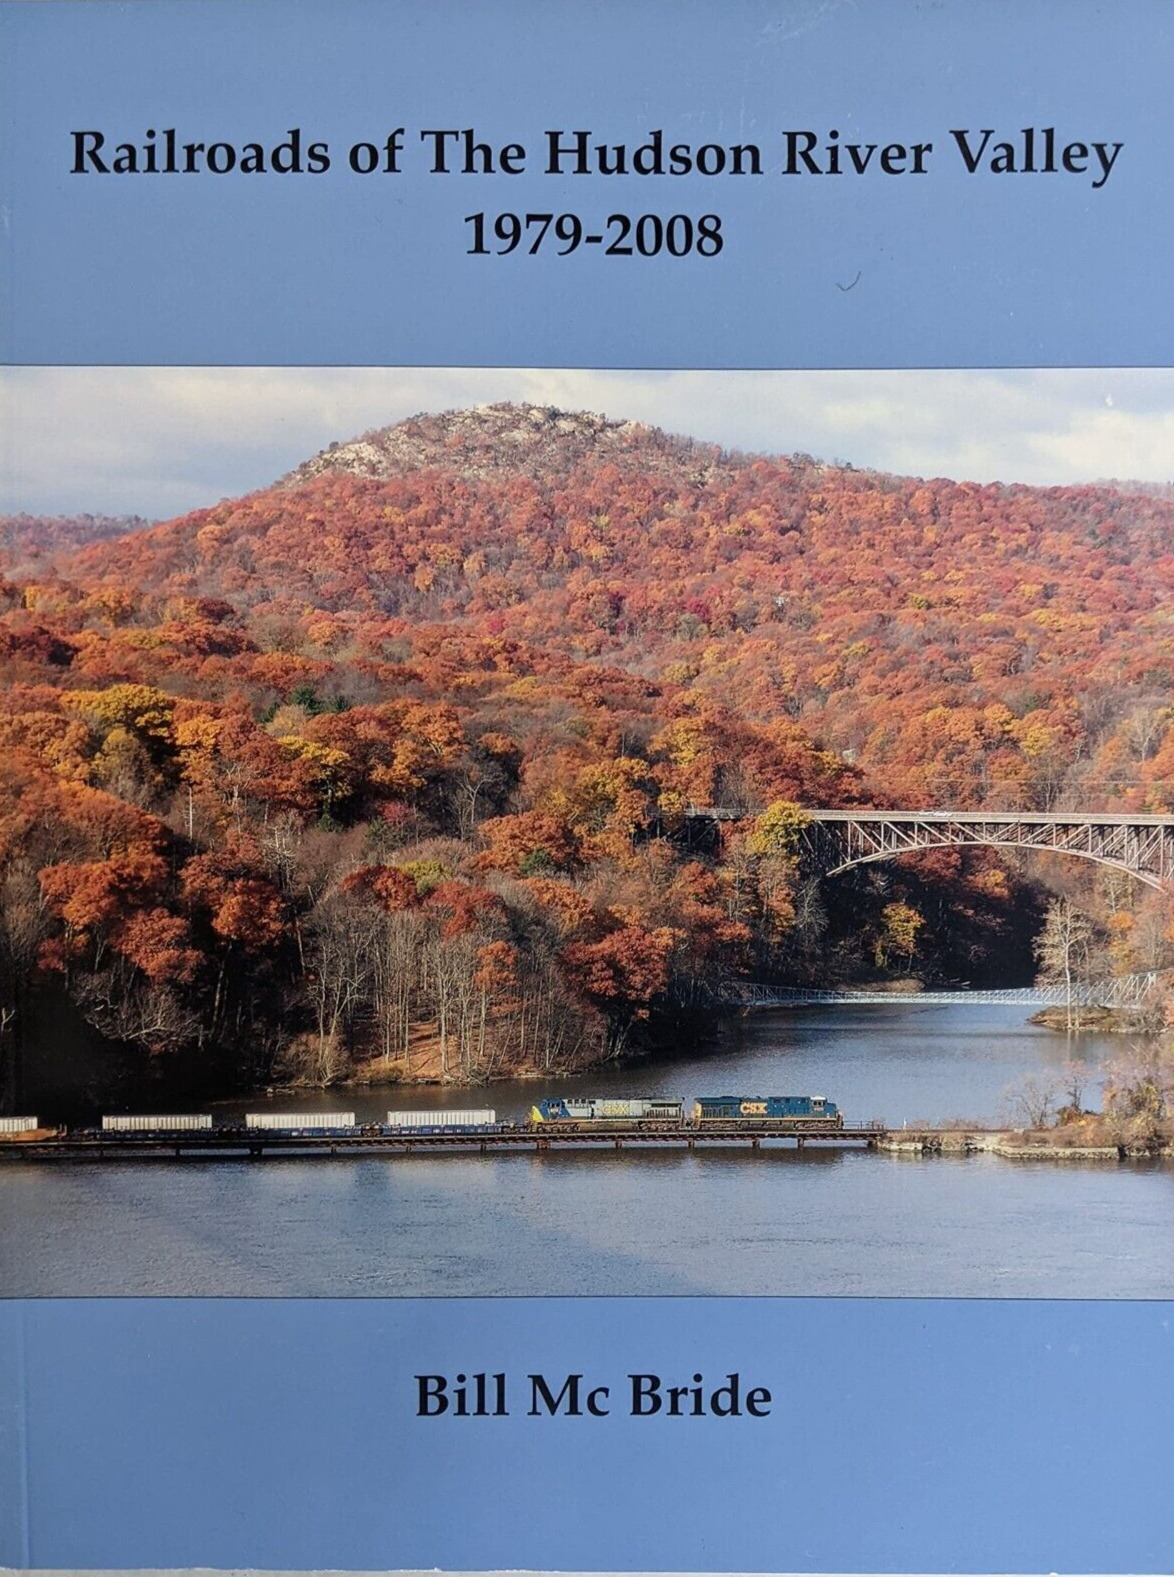 Railroads of the HUDSON RIVER VALLEY, 1979-2008 - (BRAND NEW BOOK)